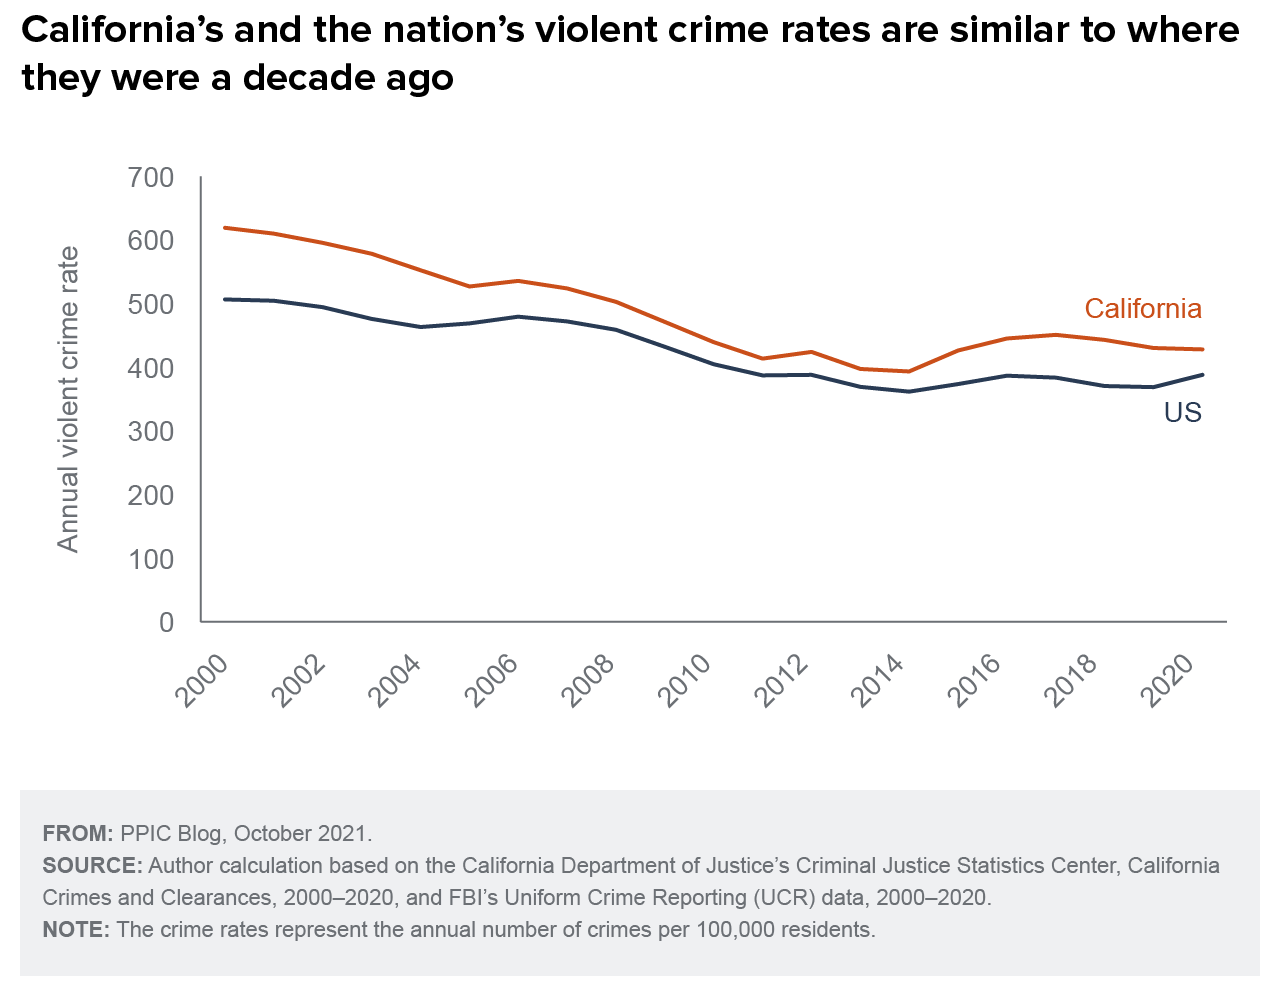 figure - California’s and the nation’s violent crime rates are similar to where they were a decade ago